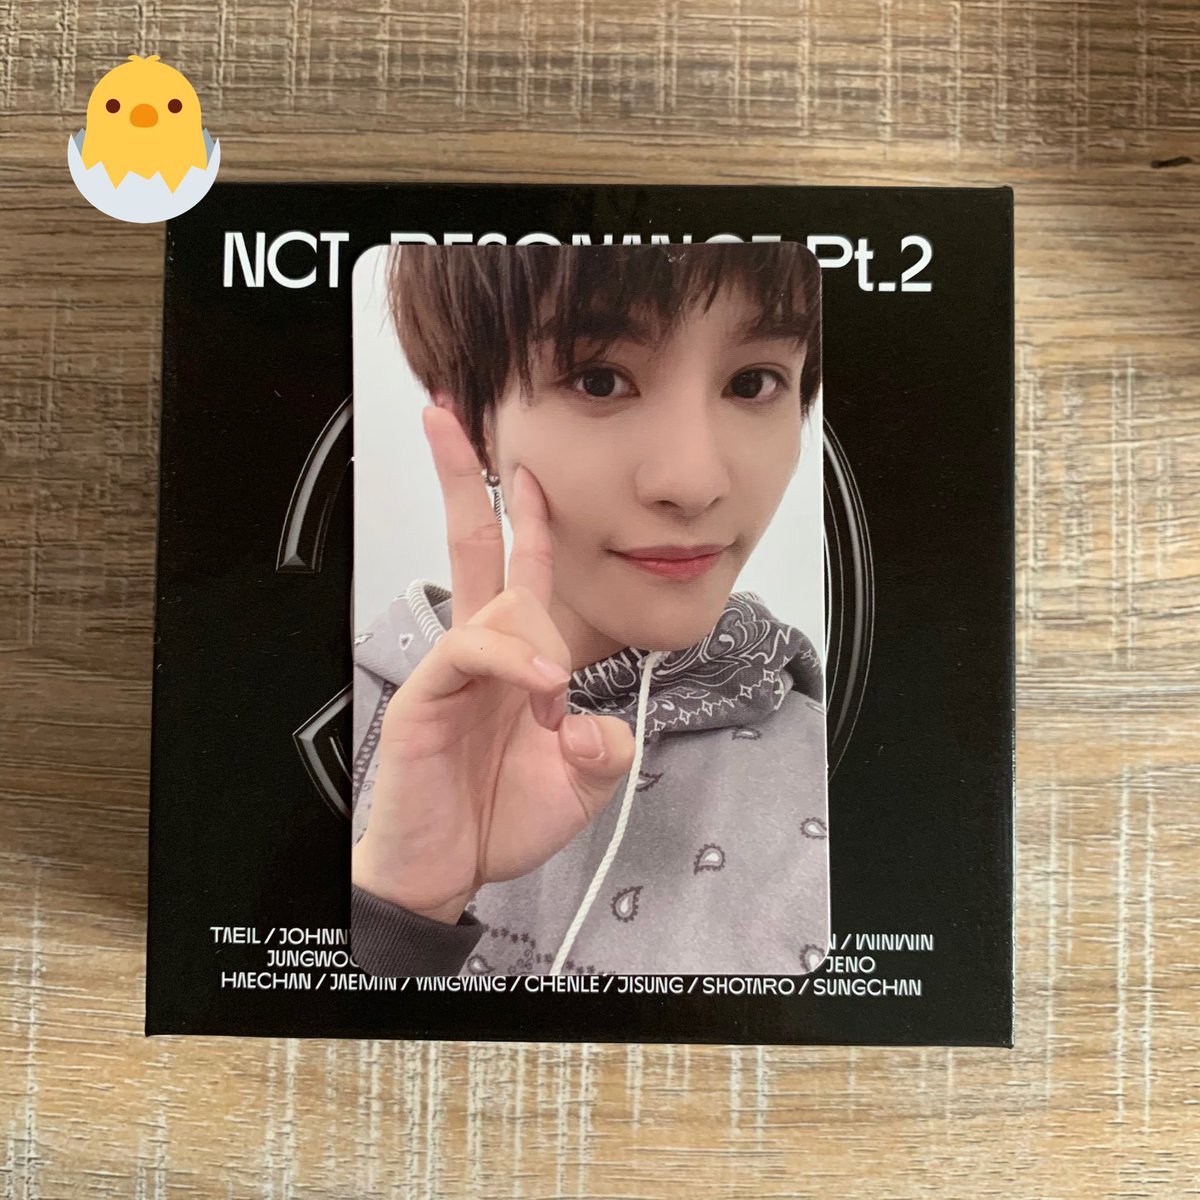  #WBBRSPH_Onhand NCT RESONANCE PART 2 KITS₱850- Unsealed but complete inclusions- Can choose member- Pc is clean and in good condition- 3 stocks